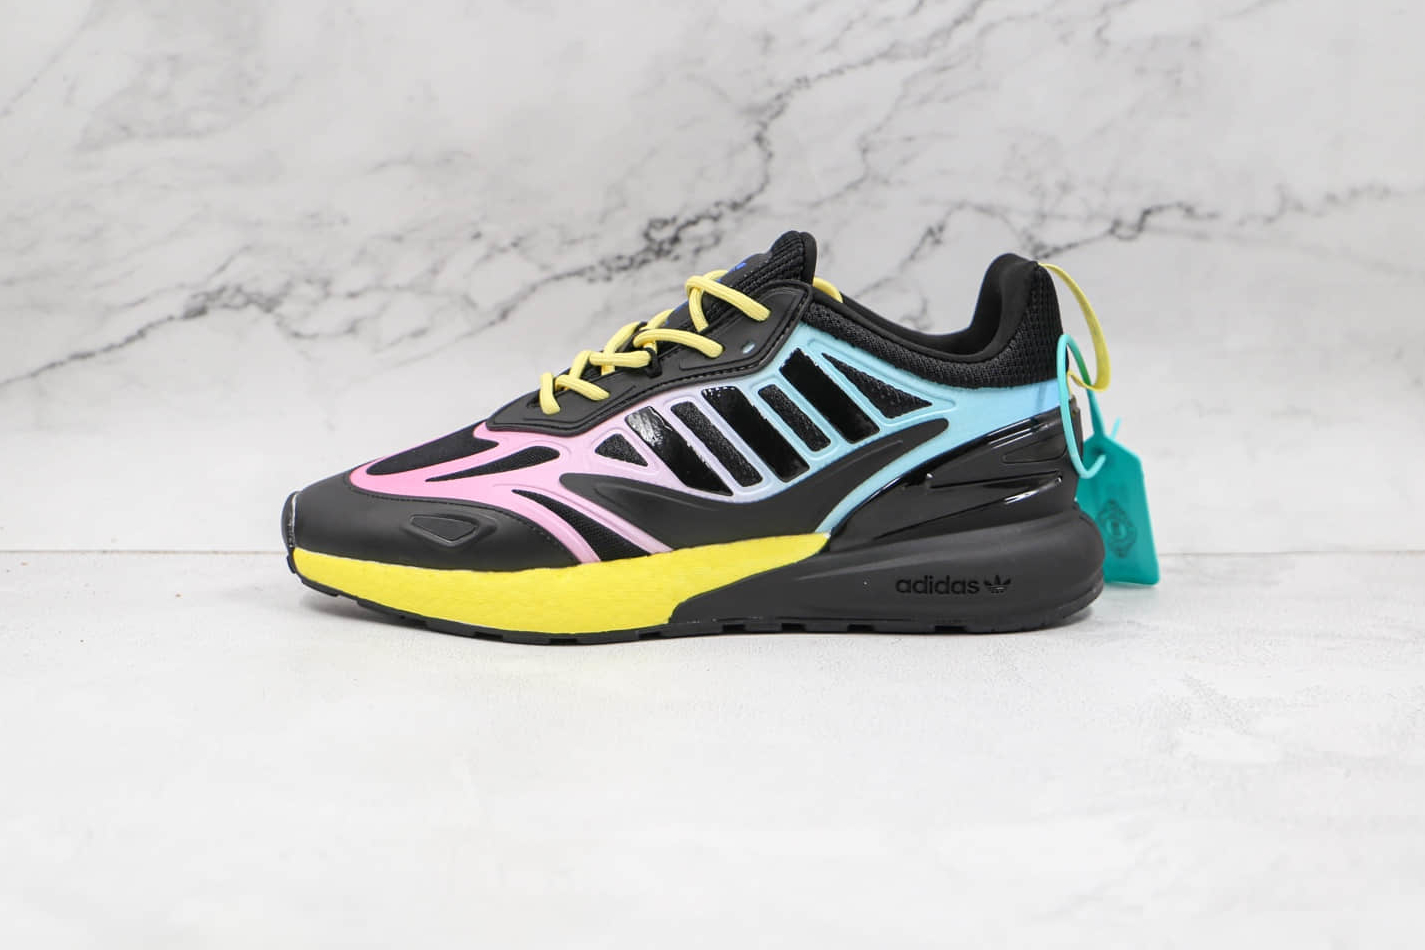 Adidas ZX 2K Boost 2.0 Athletic Sneakers Black Yellow Ink GY8283 - Shop Now!